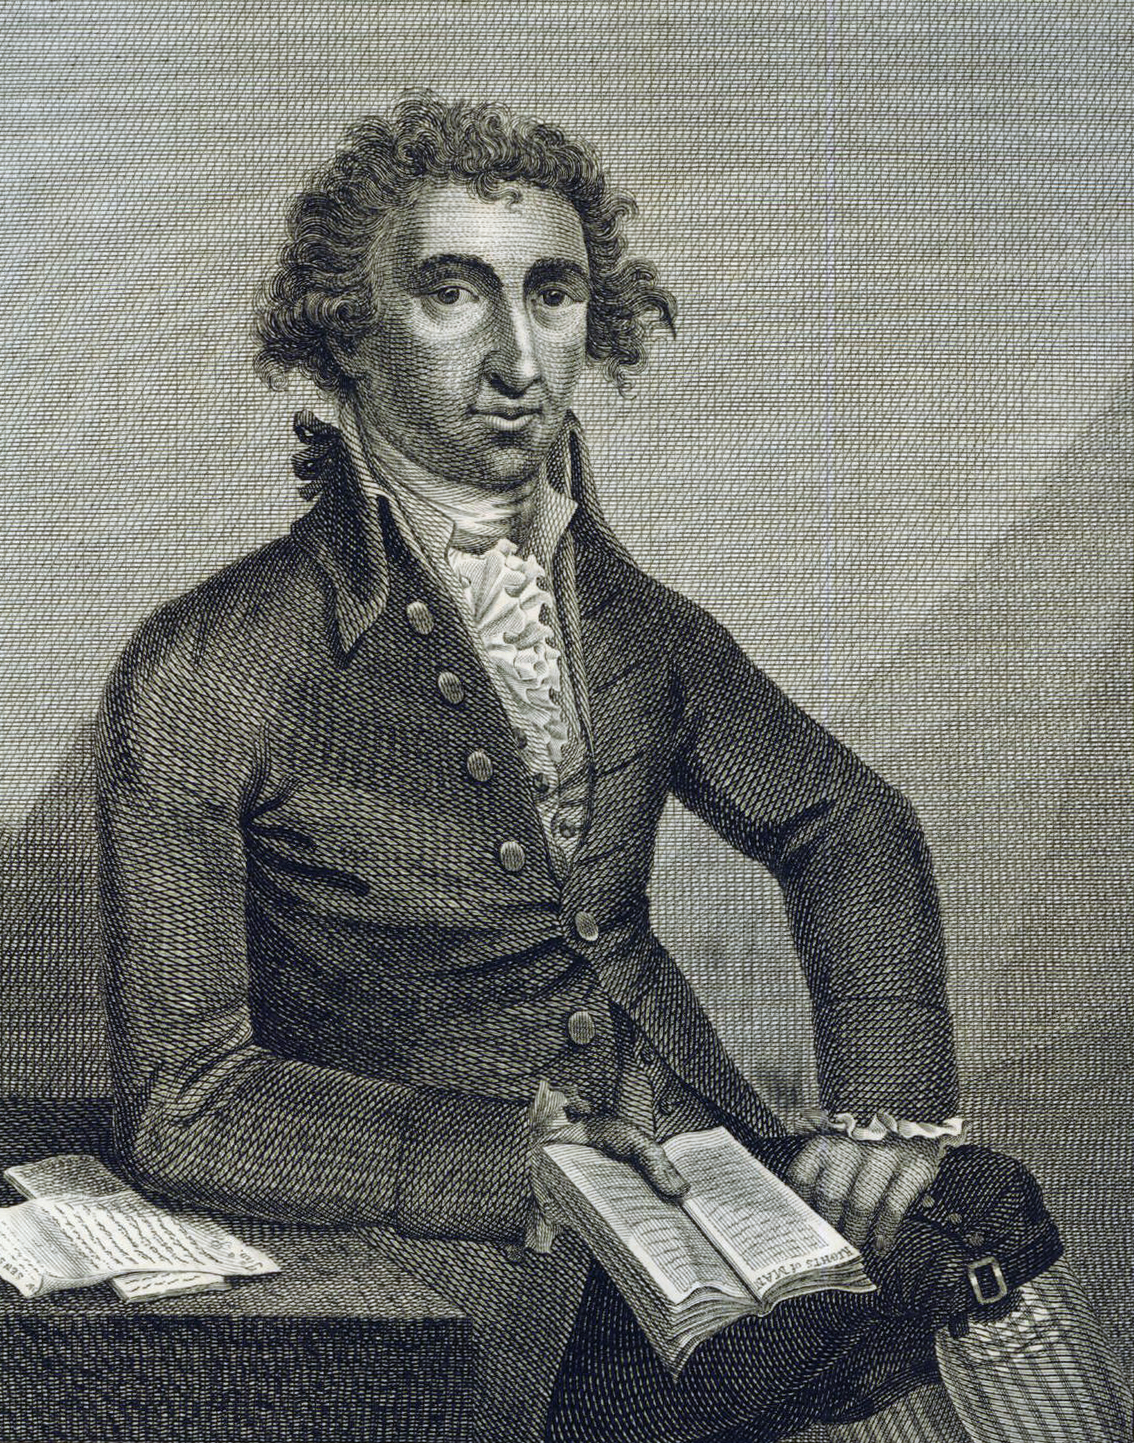 1792 etching and engraving of Thomas Paine. He is depicted three-quarter length, seated beside a table, looking towards the viewer. His legs are crossed, left hand rests on his thigh, and he holds a book in his right hand with his elbow on the table. Based on a work by Collings.